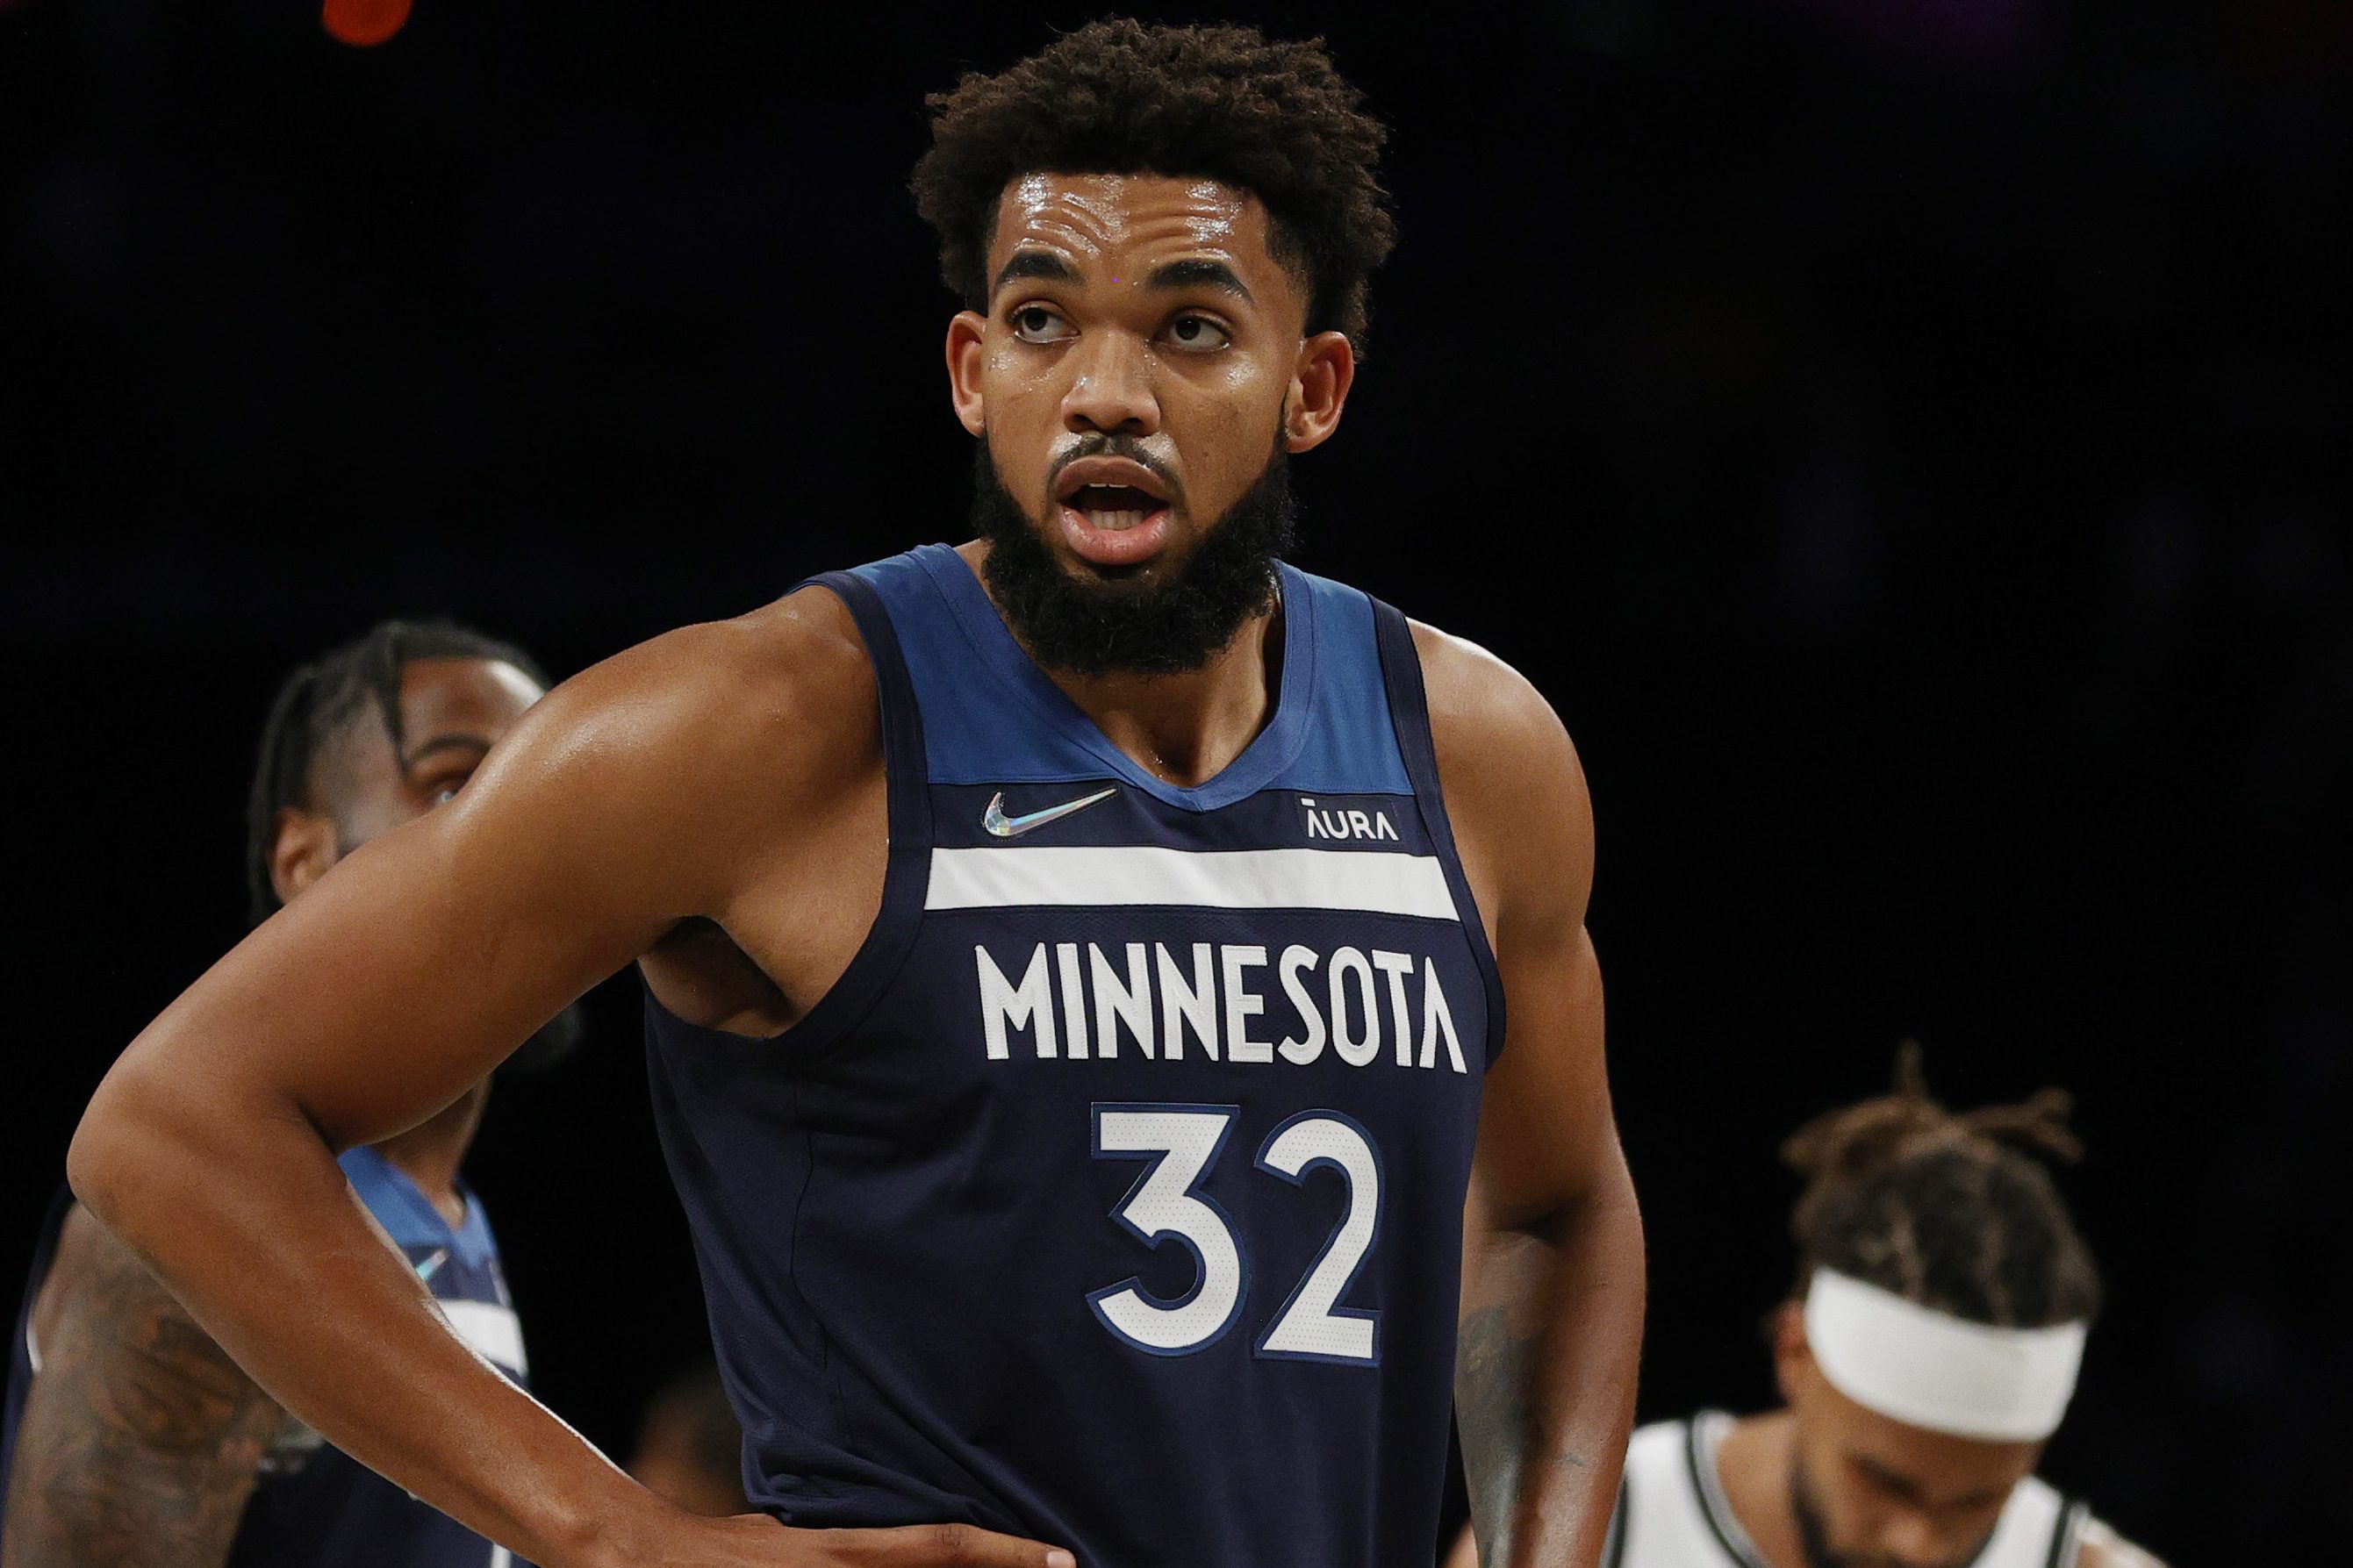 Karl-Anthony Towns of the Minnesota Timberwolves on the floor. Towns watches gorilla fights before NBA games.